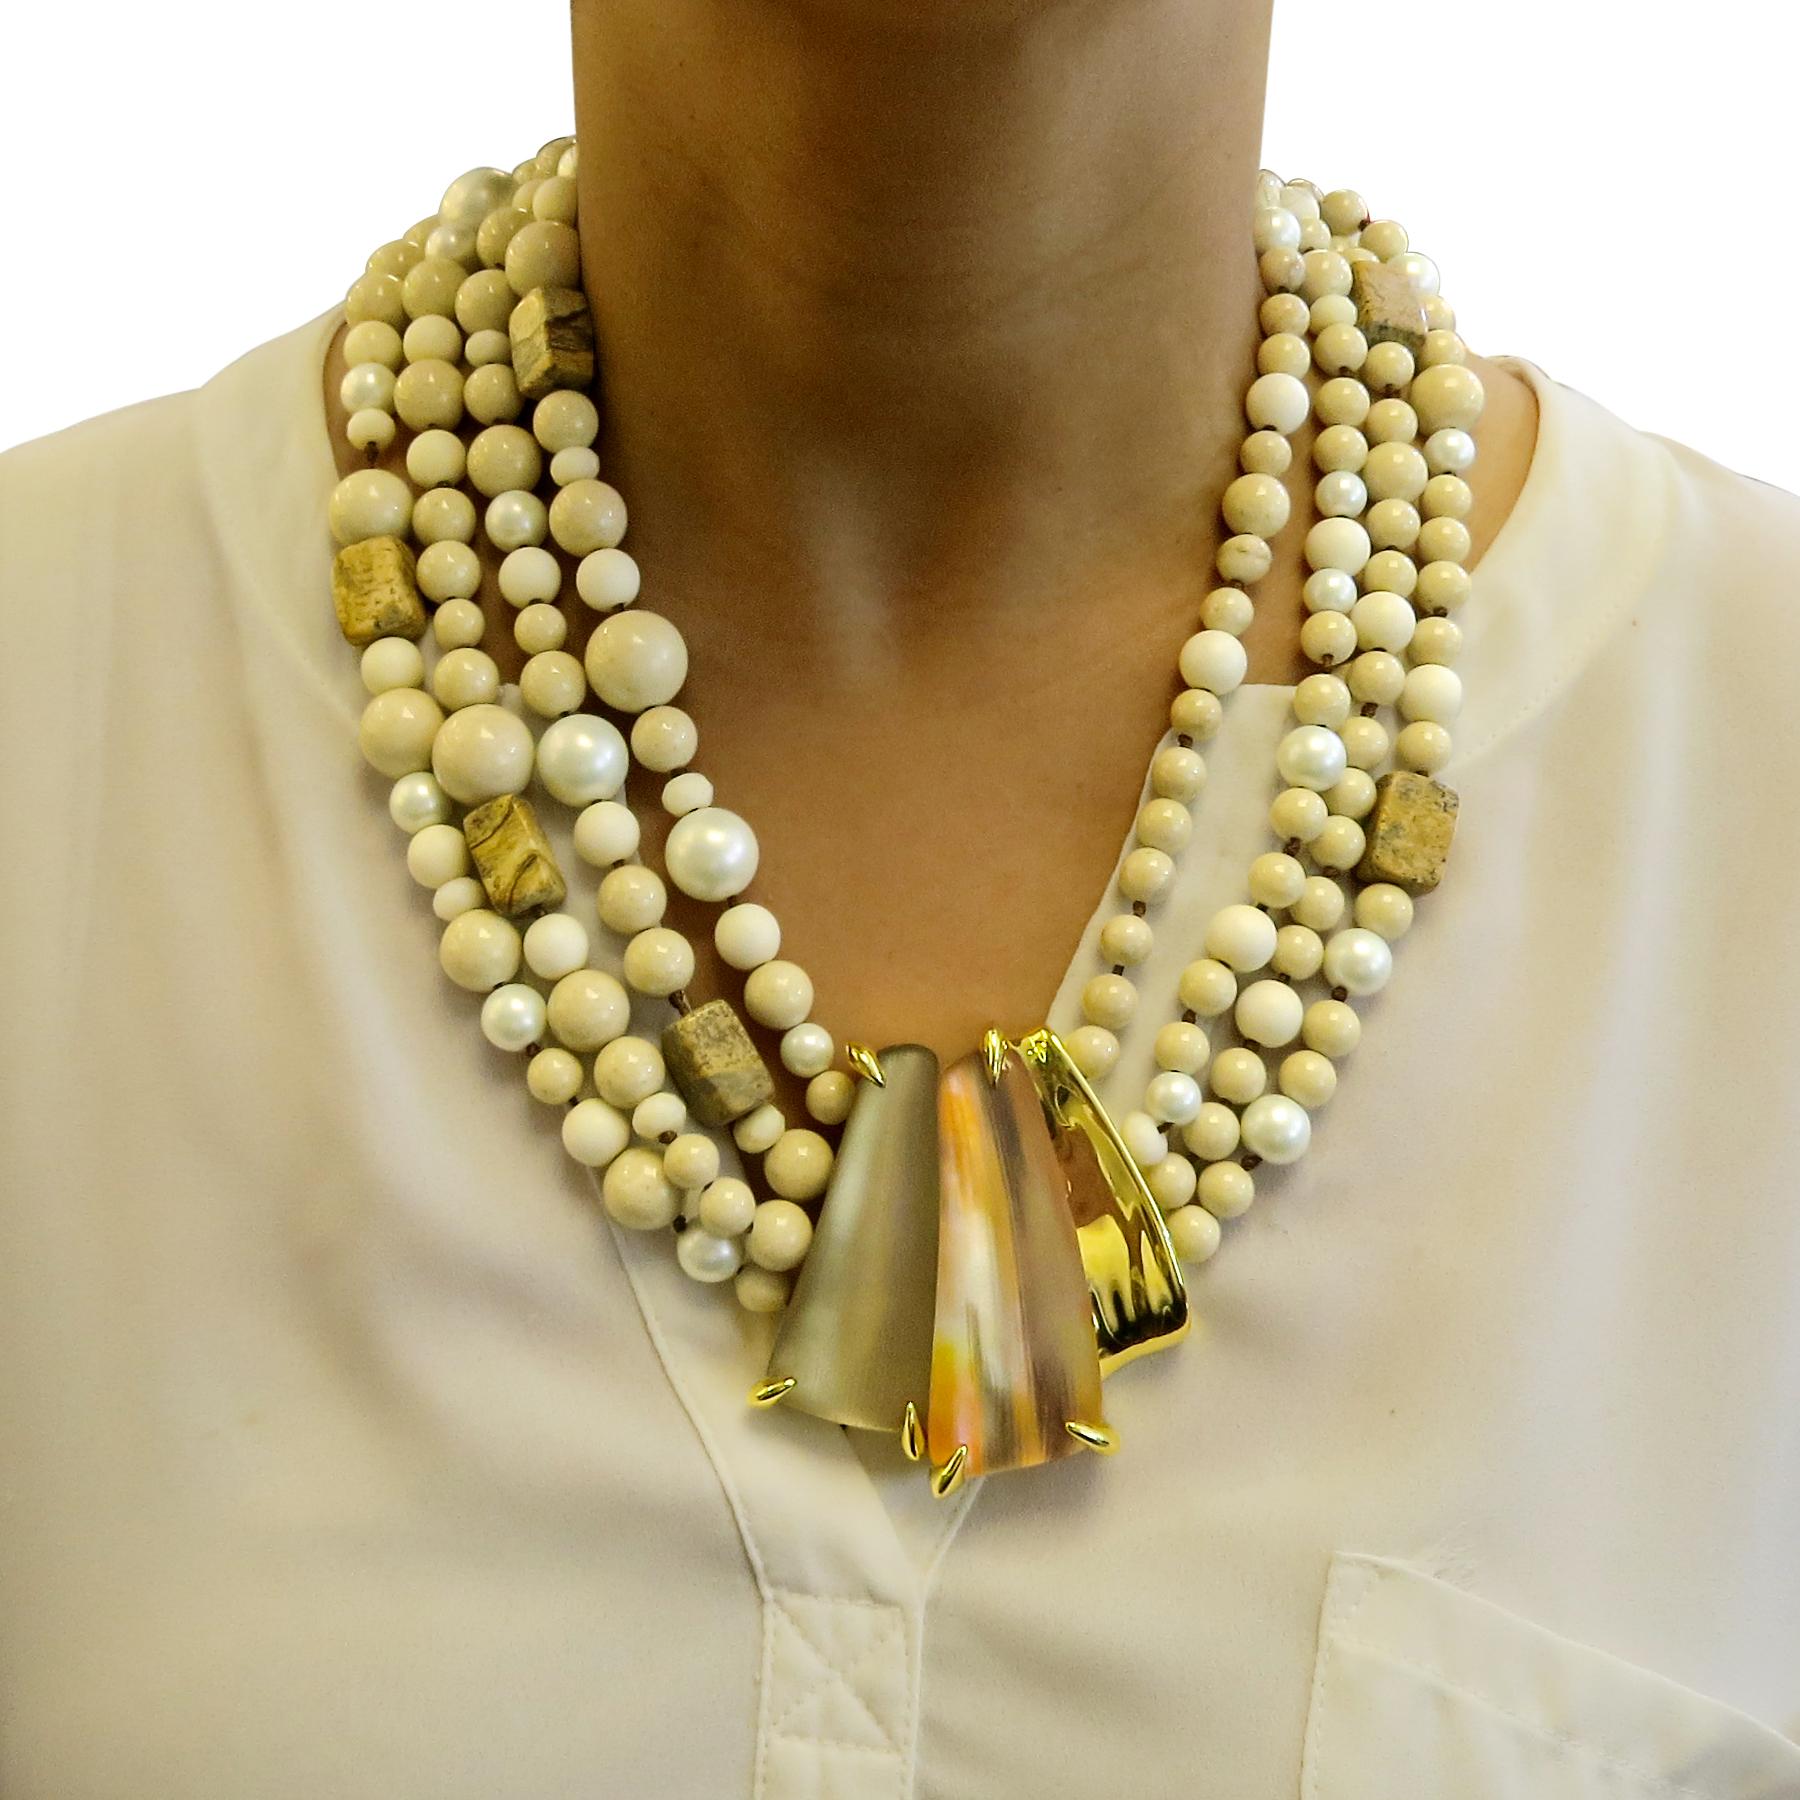  ALEXIS BITTAR Desert Jasmine Torsade Collar Statement Necklace
A Stunning Statement Necklace
Strands of stone and faux pearls 
Amazing!!
Magnetic clasp 
Alexis Bittar stamped.
Jasper Doublet and Pearl Multi-Strand Necklace features a Hand-Painted